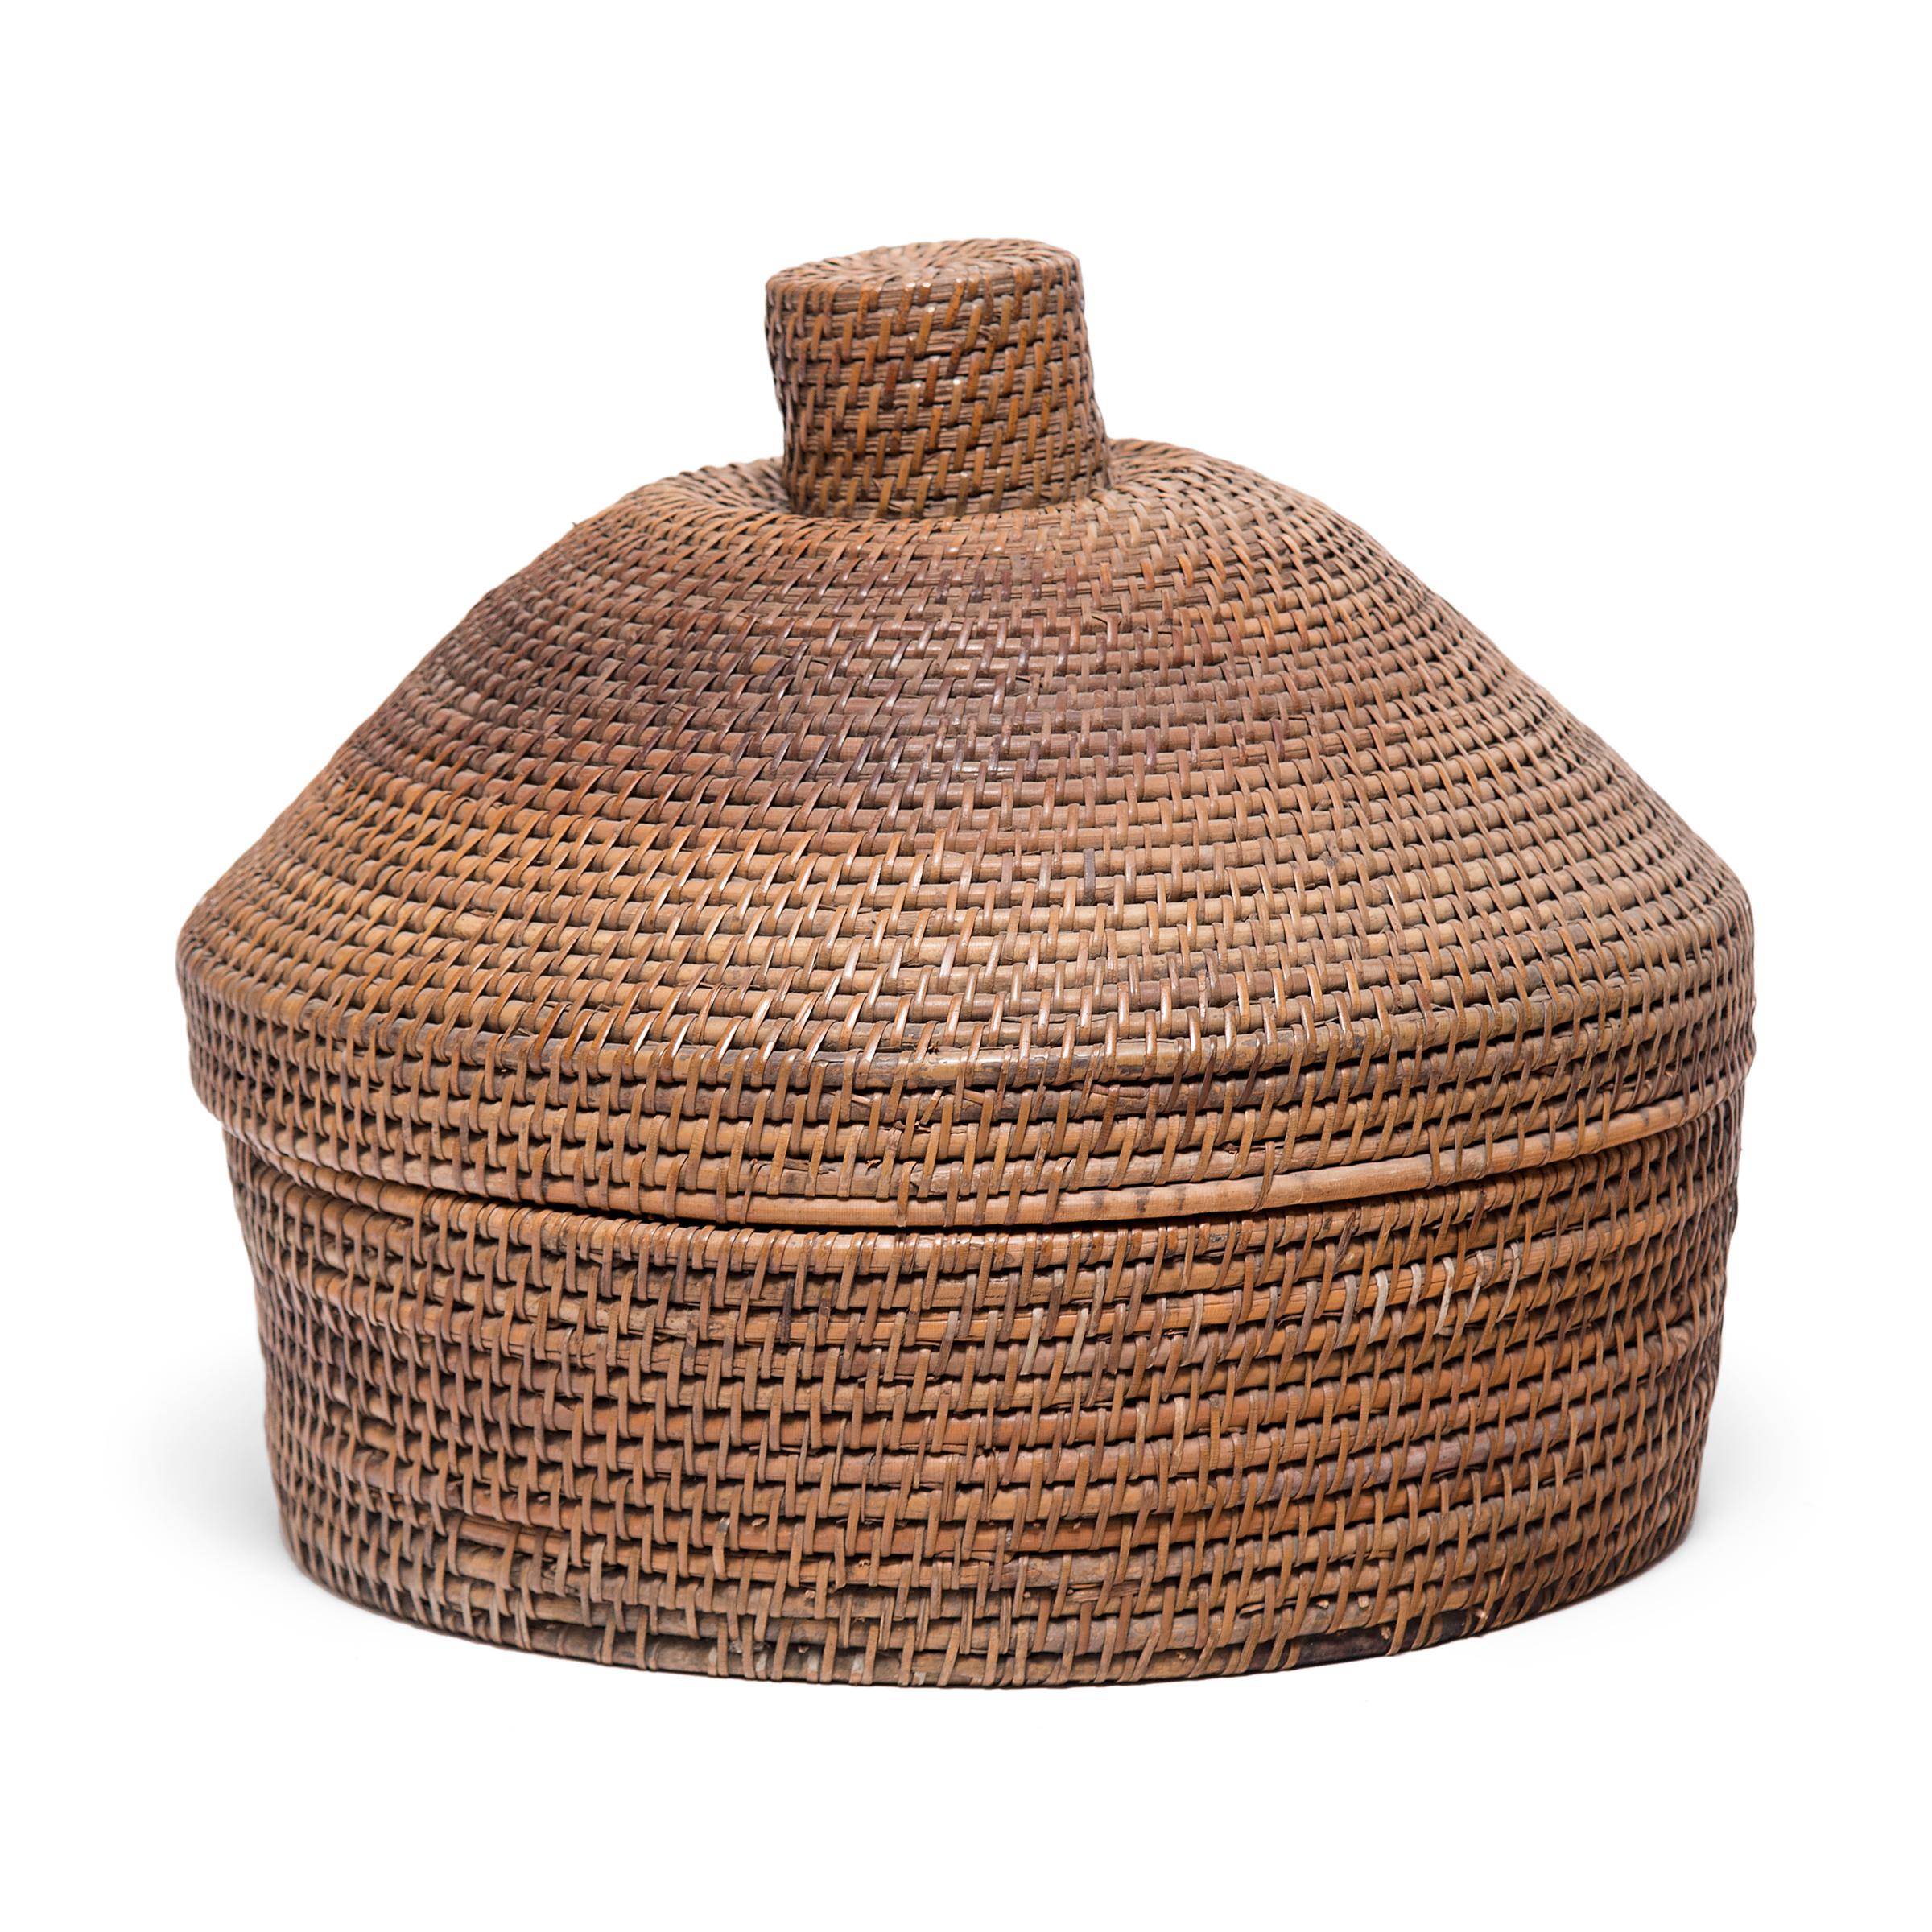 Hand-Woven Provincial Chinese Woven Summer Hat Box, circa 1850